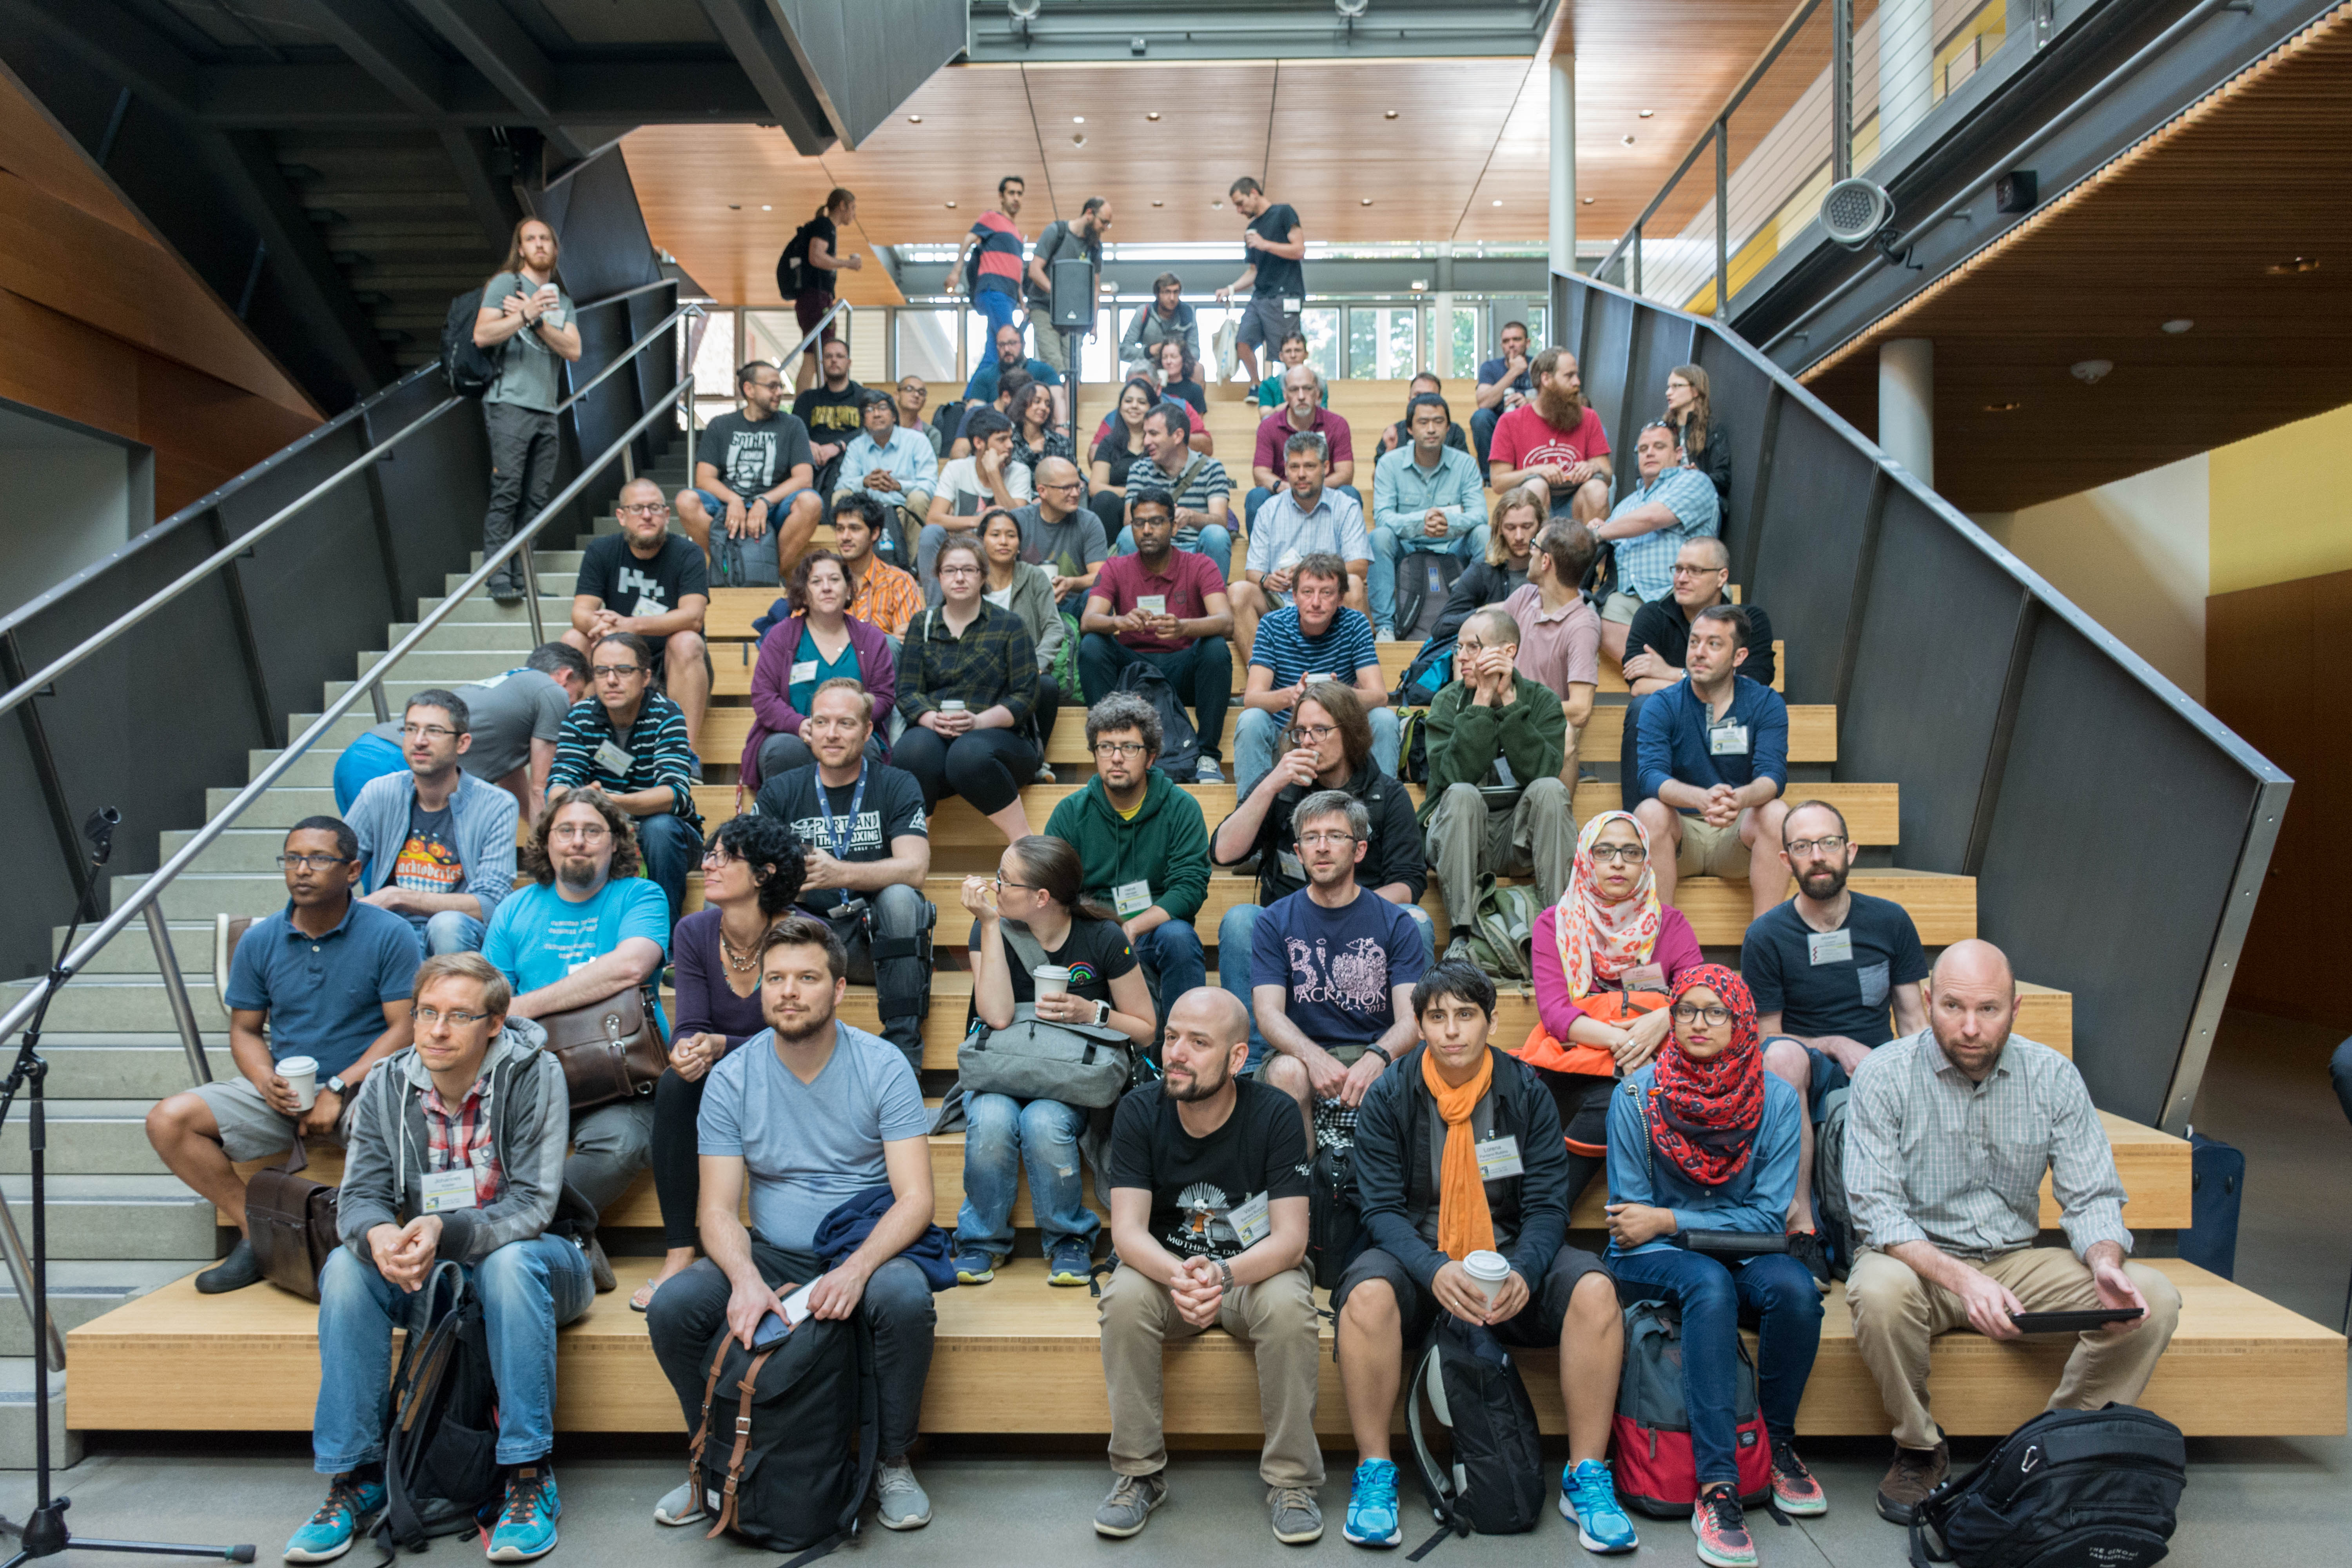 Attendees at the 2018 GCCBOSC CoFest